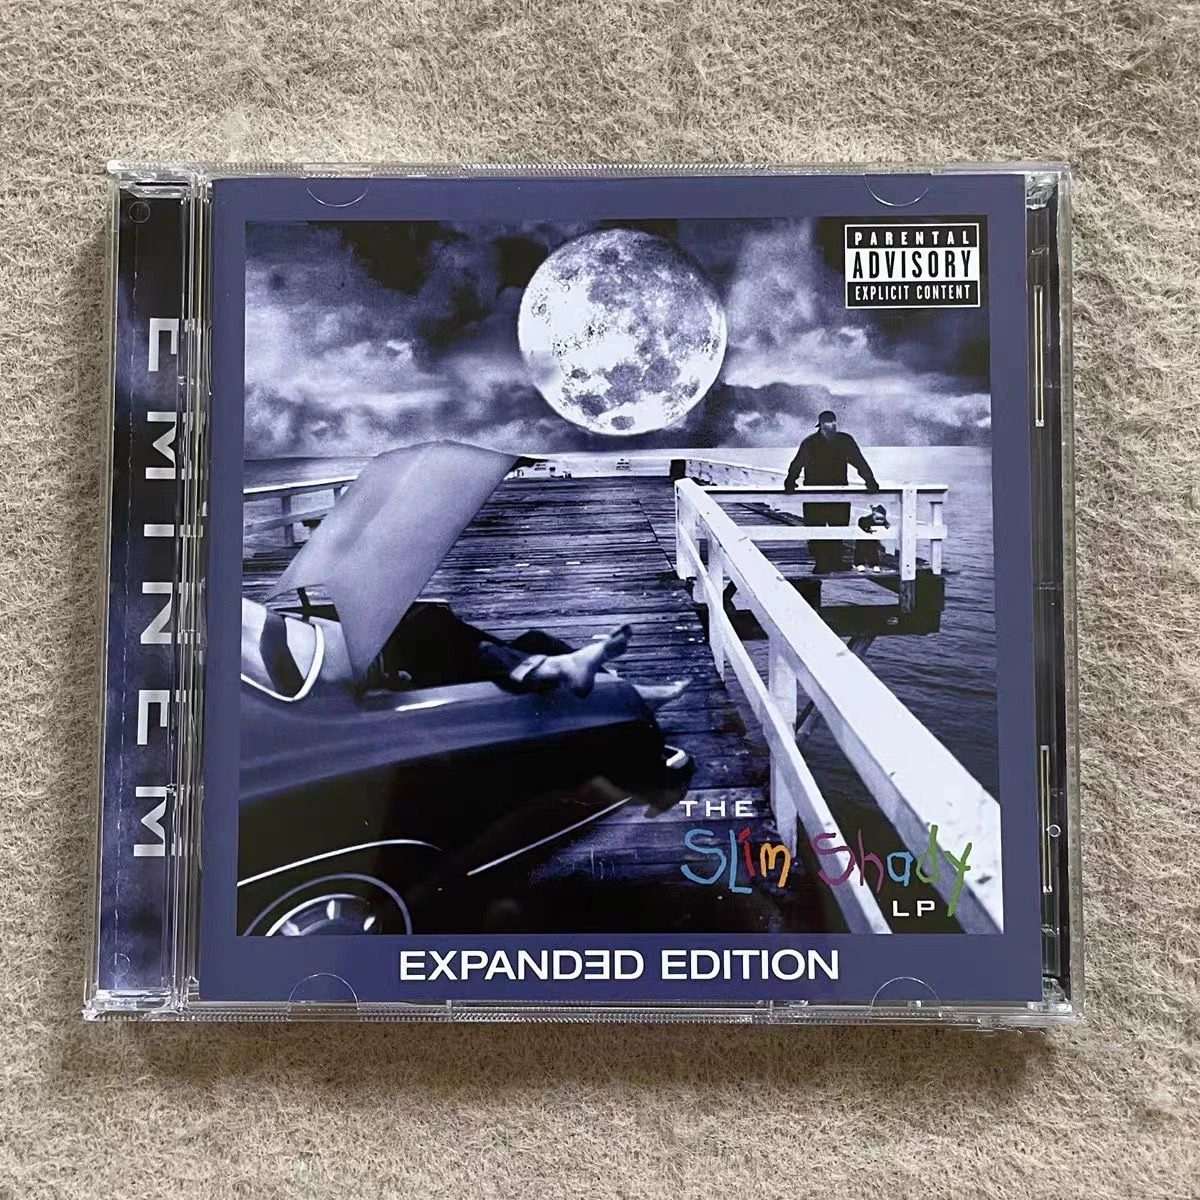 

Retro Eminem Music CD The Slim Shady LP Album Compact Disc Cosplay CD Car Walkman Play Songs Party Music Collection Gifts Prop